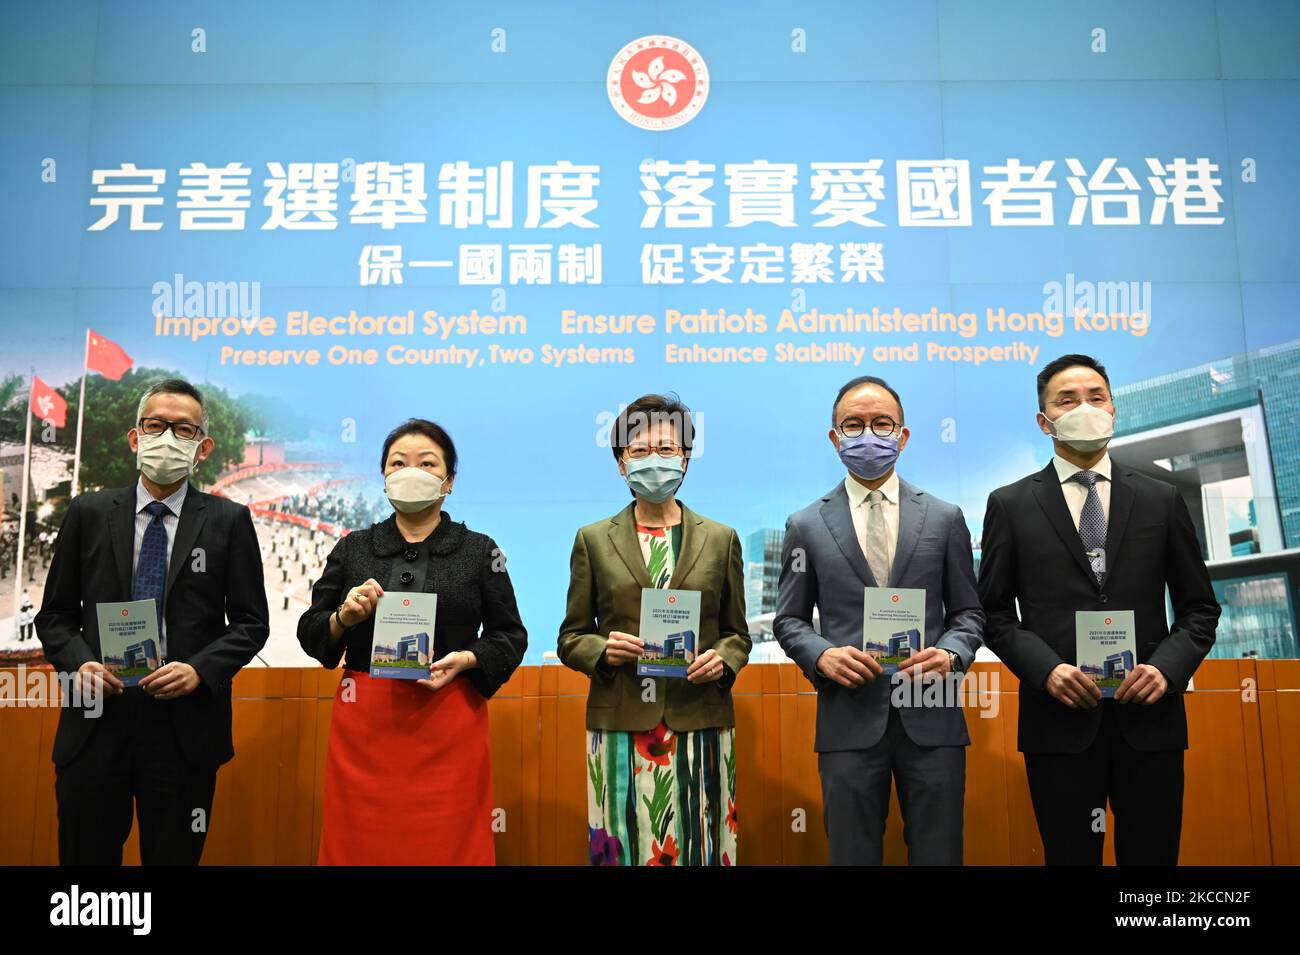 From Left to Right Ms Llewellyn Mui, Acting Officer(Special Duties), Ms Teresa Cheng, Secretary for Justice, Mrs Carrie Lam, Chief Executive of Hong Kong, Mr Eric Tsang, Secretary for constitution and mainland affairs, Mr Roy Tang, permanent secretary for Constitutional and Mainland affairs hols up booklet during a press conference on 'Improving Electoral System' in Hong Kong, China, on April 13, 2021. The government is formally proposing to make it a crime for people to urge others to cast blank or spoiled ballots, or not vote at all, as it unveiled a host of bills to amend local laws in line Stock Photo